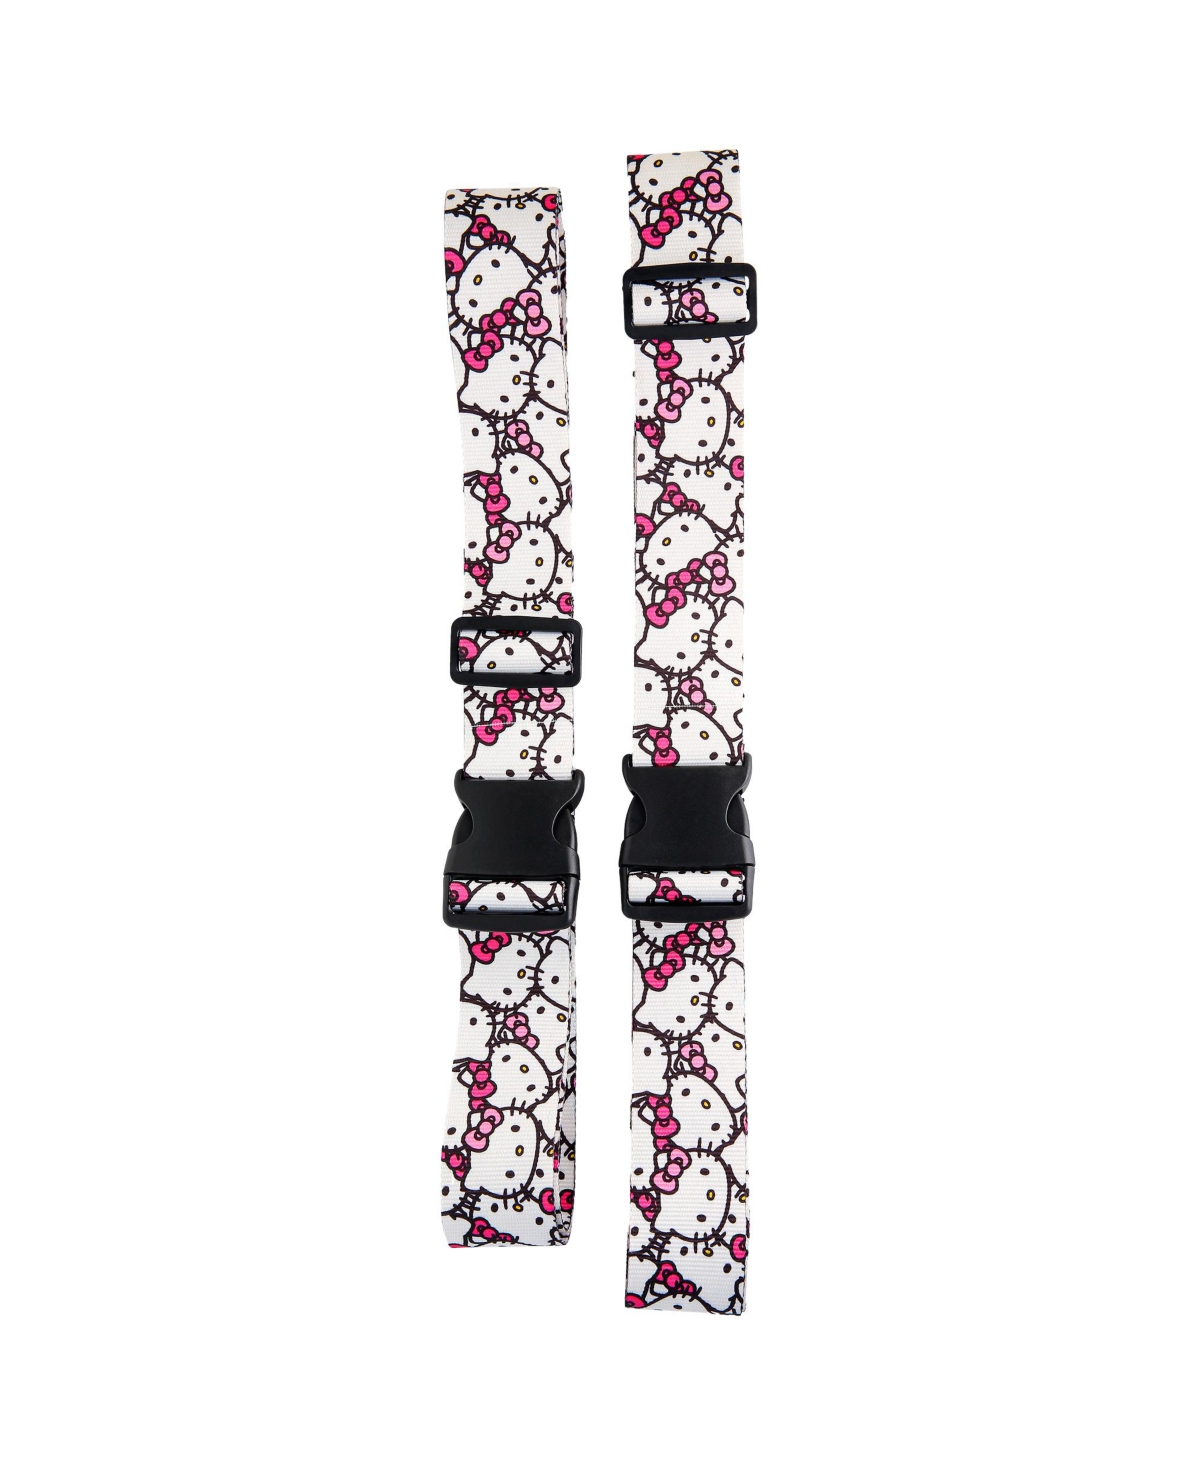 Sanrio Hello Kitty Luggage Strap 2-Piece Set Officially Licensed, Adjustable Luggage Straps from 30'' to 72'' - White, pink